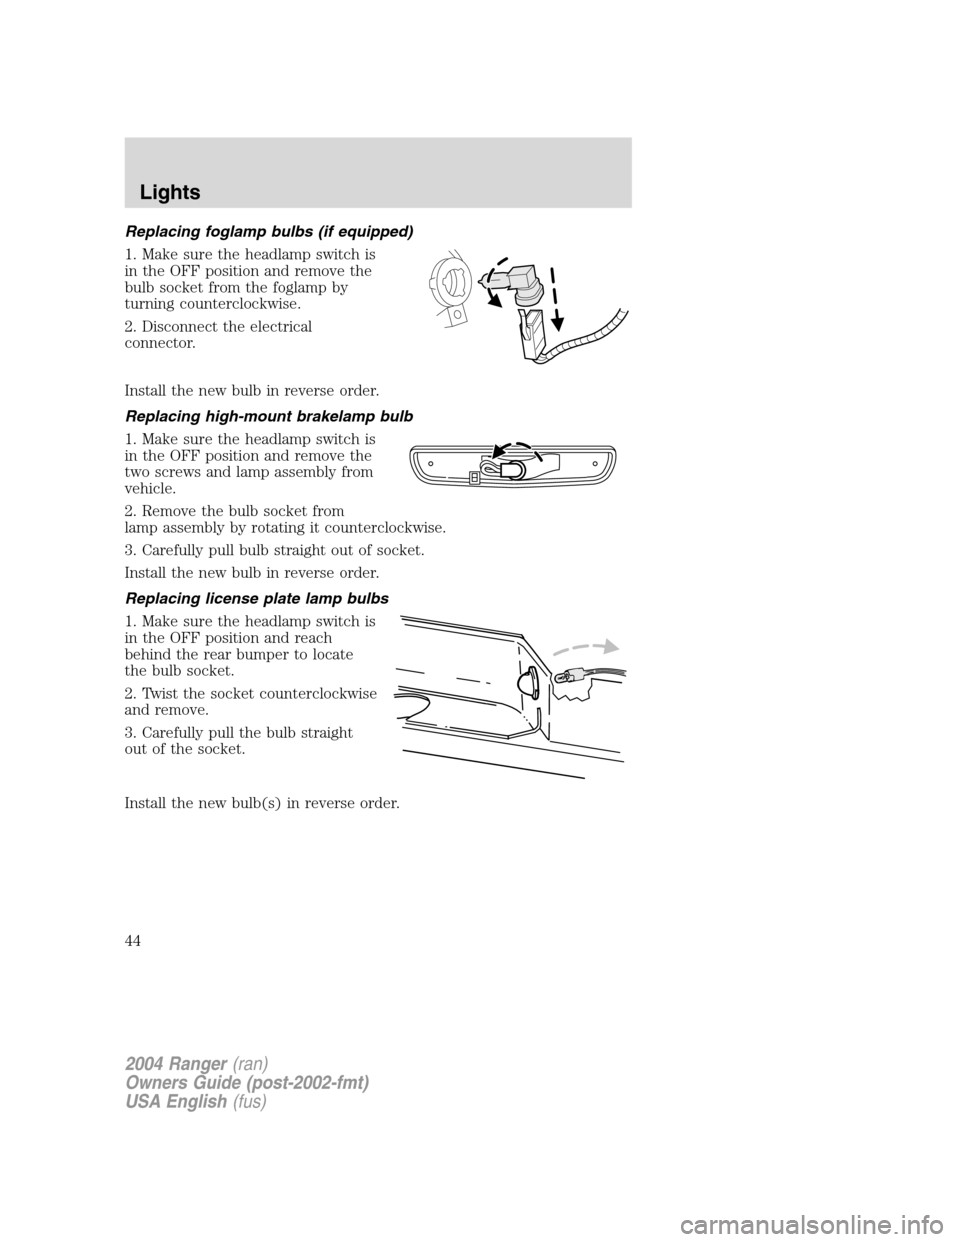 FORD RANGER 2004 2.G Service Manual Replacing foglamp bulbs (if equipped)
1. Make sure the headlamp switch is
in the OFF position and remove the
bulb socket from the foglamp by
turning counterclockwise.
2. Disconnect the electrical
conn